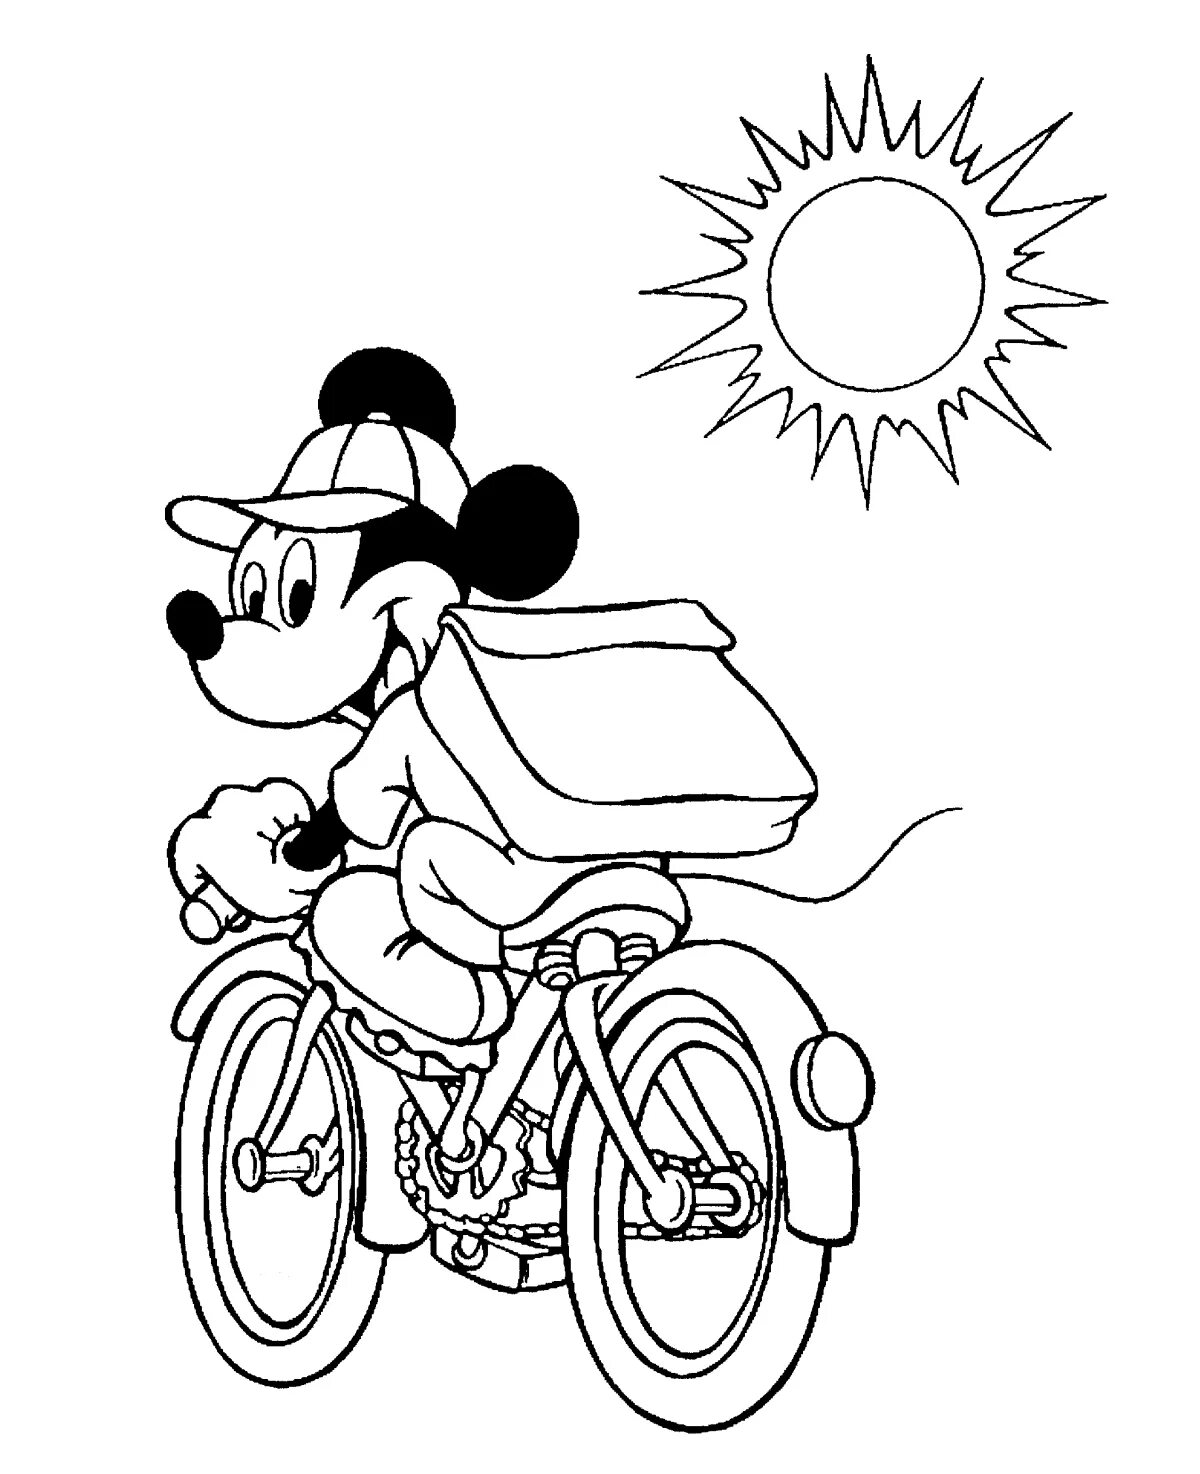 Magic Pechkin postman coloring pages for kids